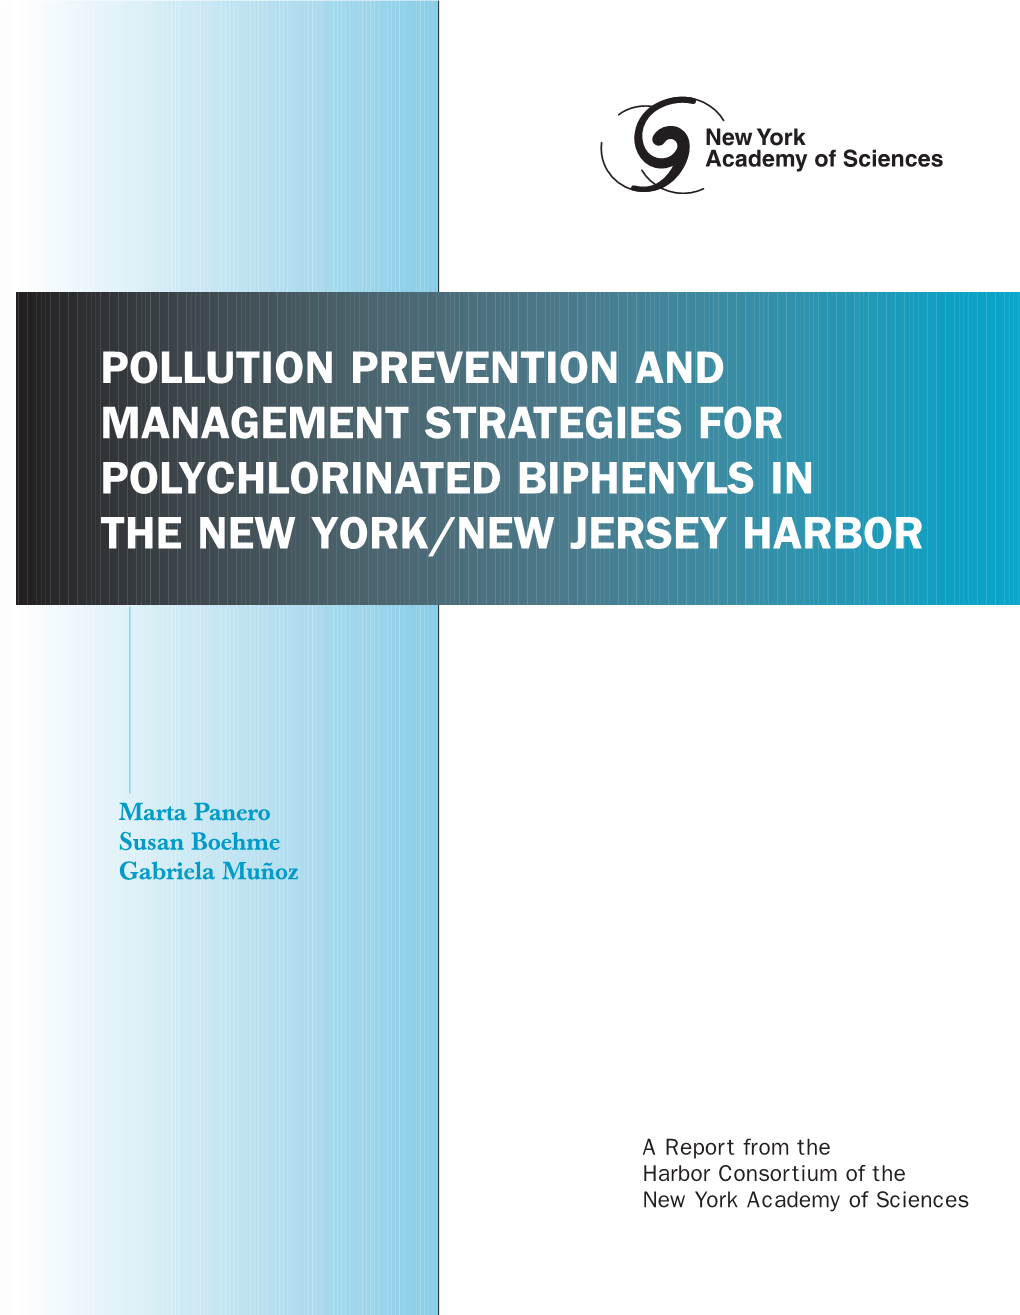 Pollution Prevention and Management Strategies for Polychlorinated Biphenyls in the New York/New Jersey Harbor